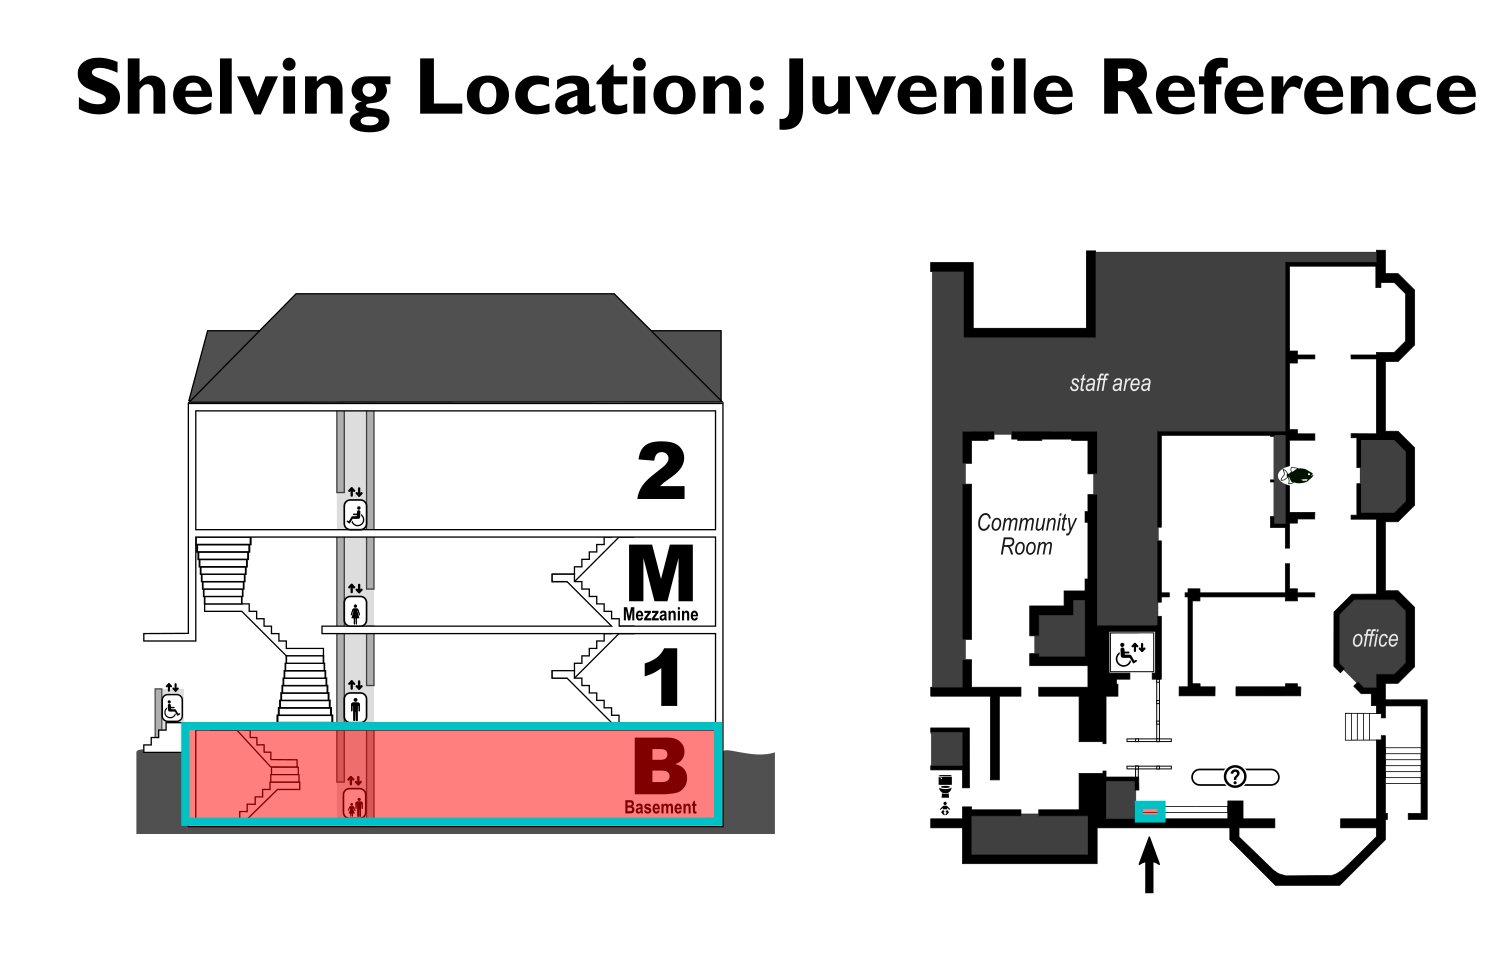 map showing location of the Juvenile Reference shelving location